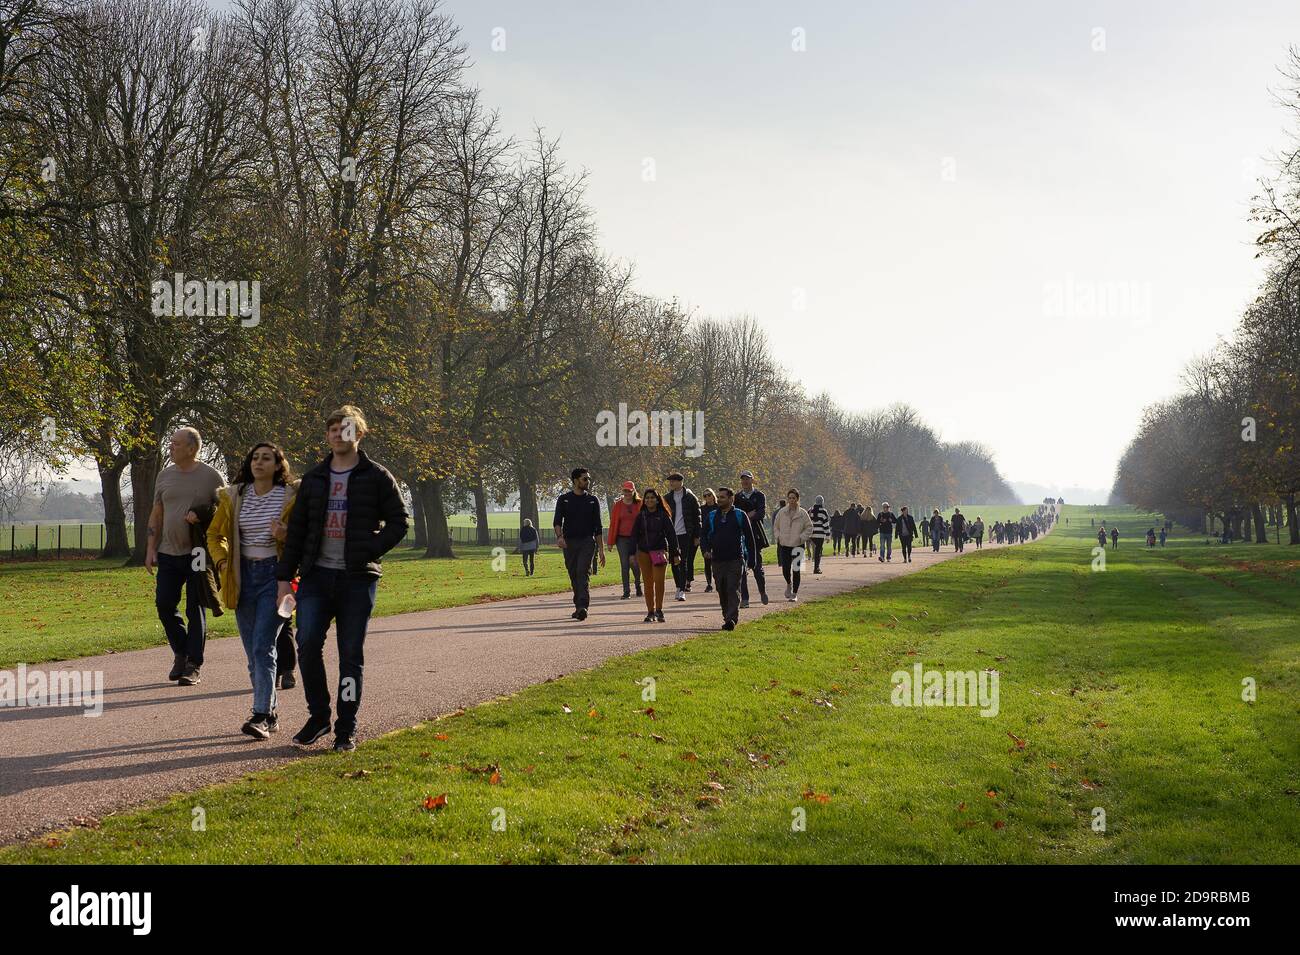 Windsor, Berkshire, UK. 7th November, 2020. Day 3 of the second Covid-19 Coronavirus lockdown in England. In what was one of the busiest days since the wedding of Prince Harry to Meghan Markle, hundreds of people were out walking on the Long Walk in Windsor today. Credit: Maureen McLean/Alamy Live News Stock Photo